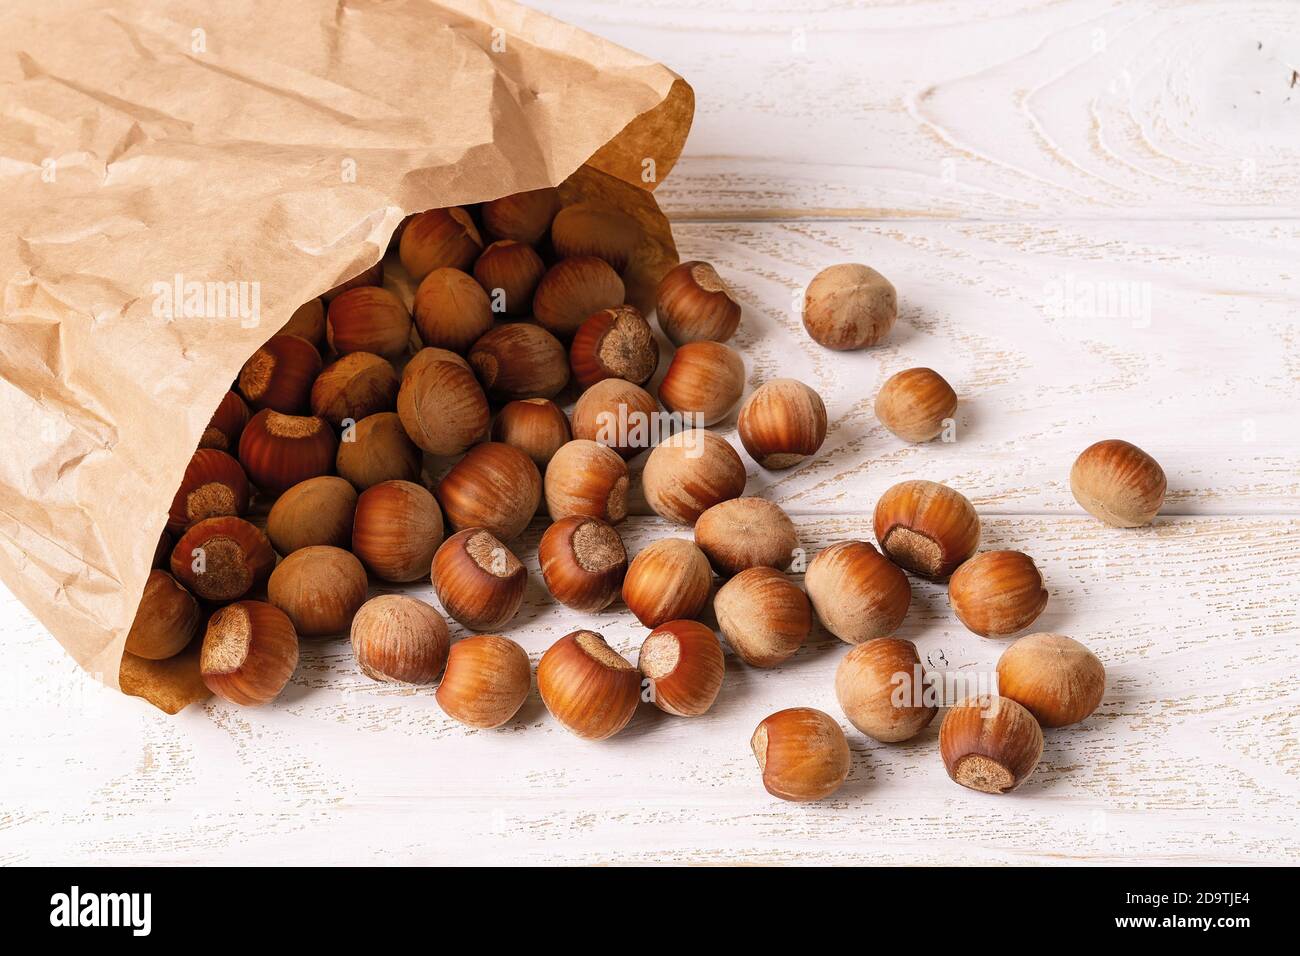 Unpeeled hazelnuts spilled out of a paper bag onto the white wood table. Antioxidant and protein source for ketogenic and raw food diets. Stock Photo